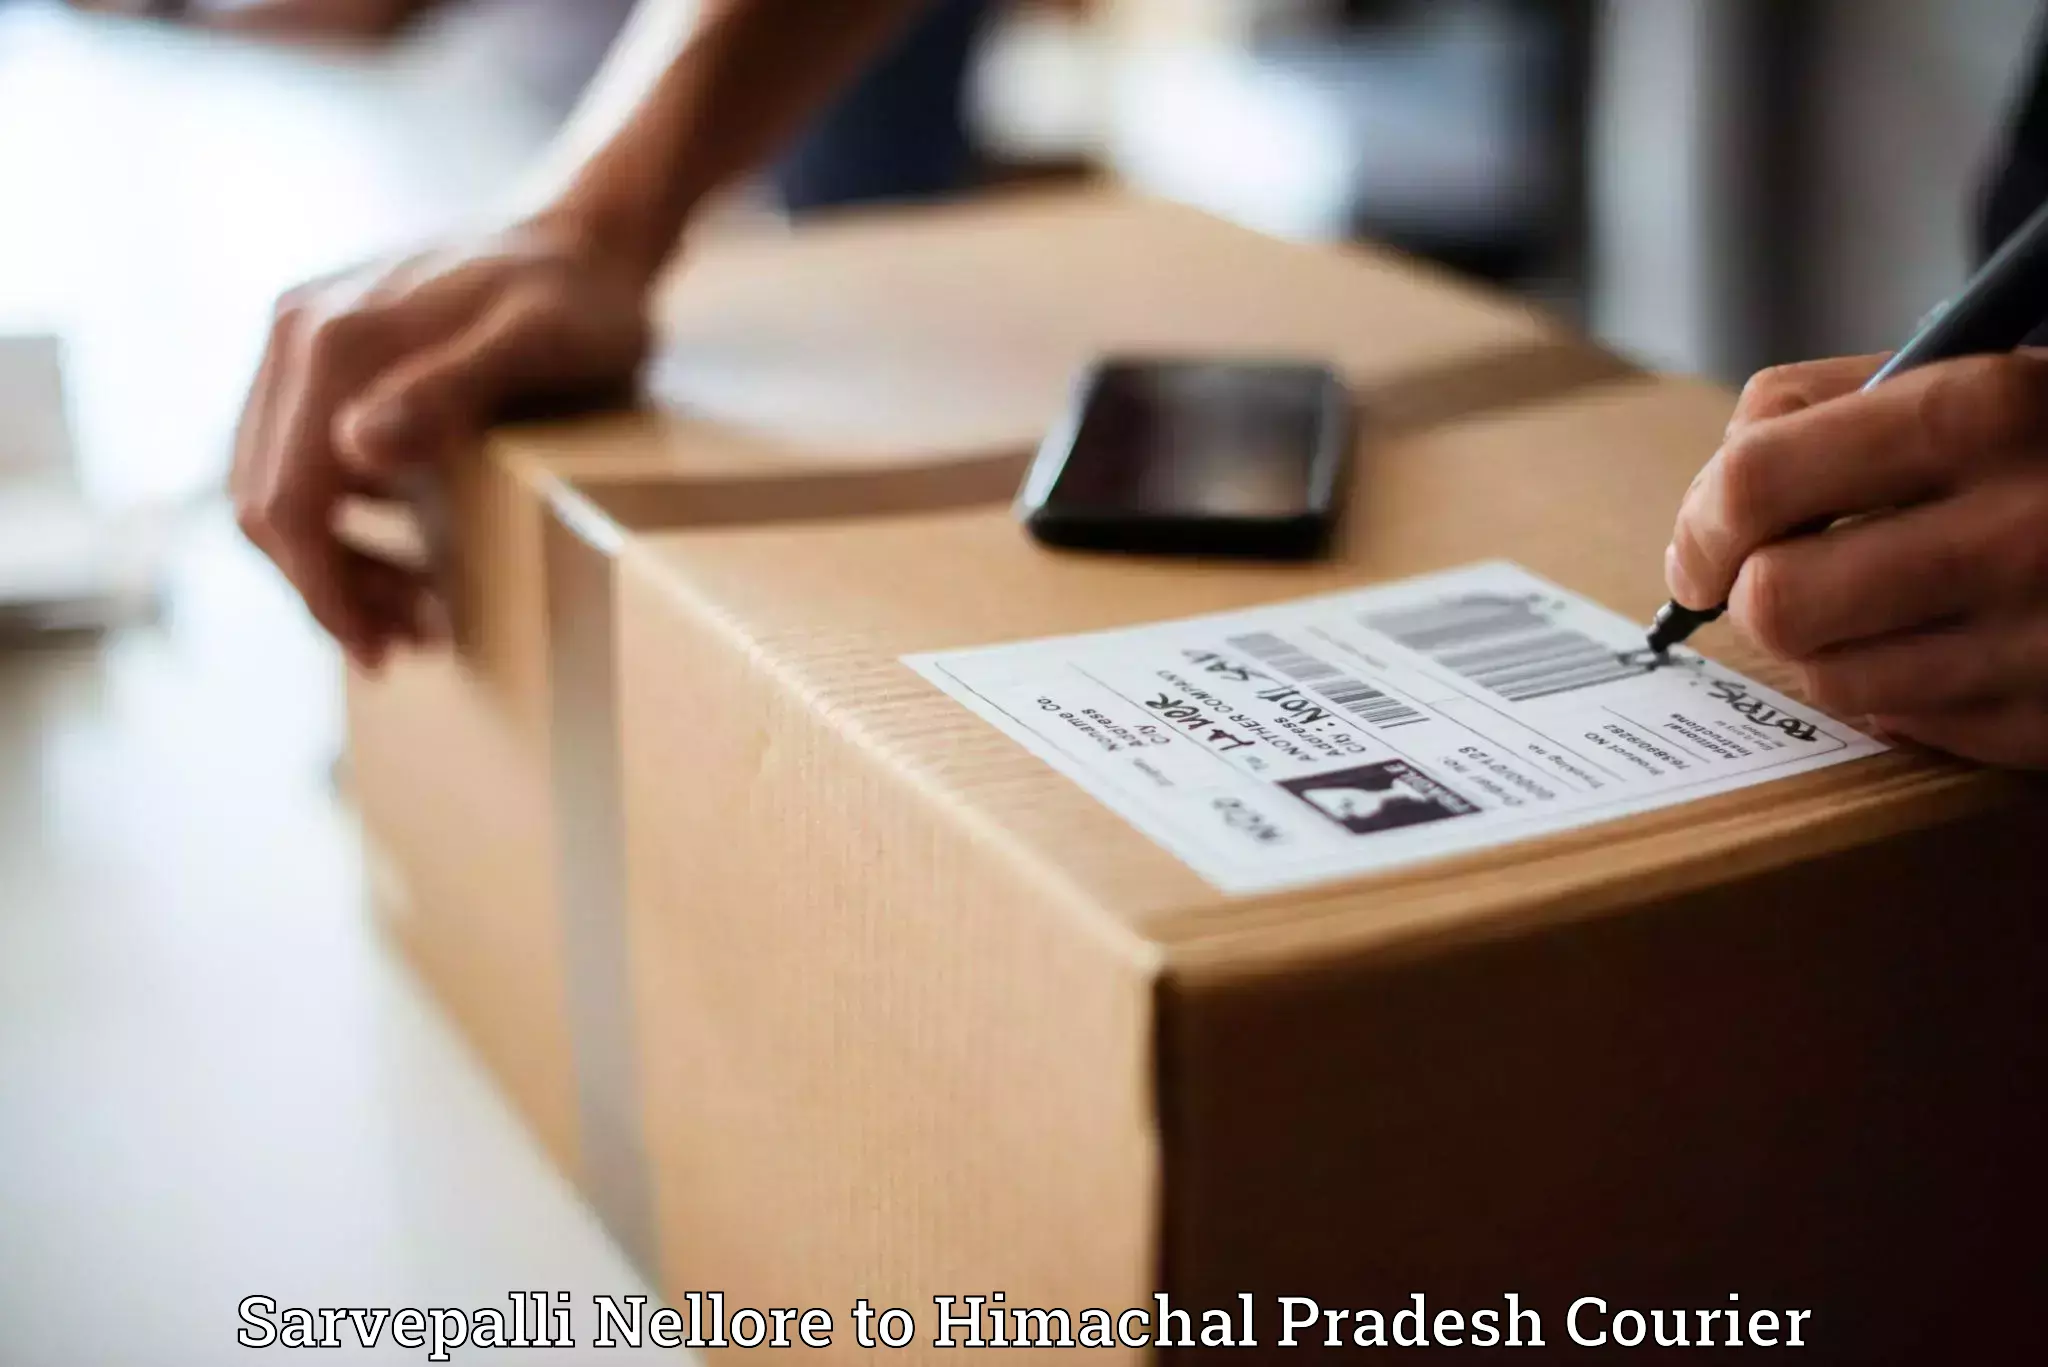 Modern courier technology Sarvepalli Nellore to Dharamshala